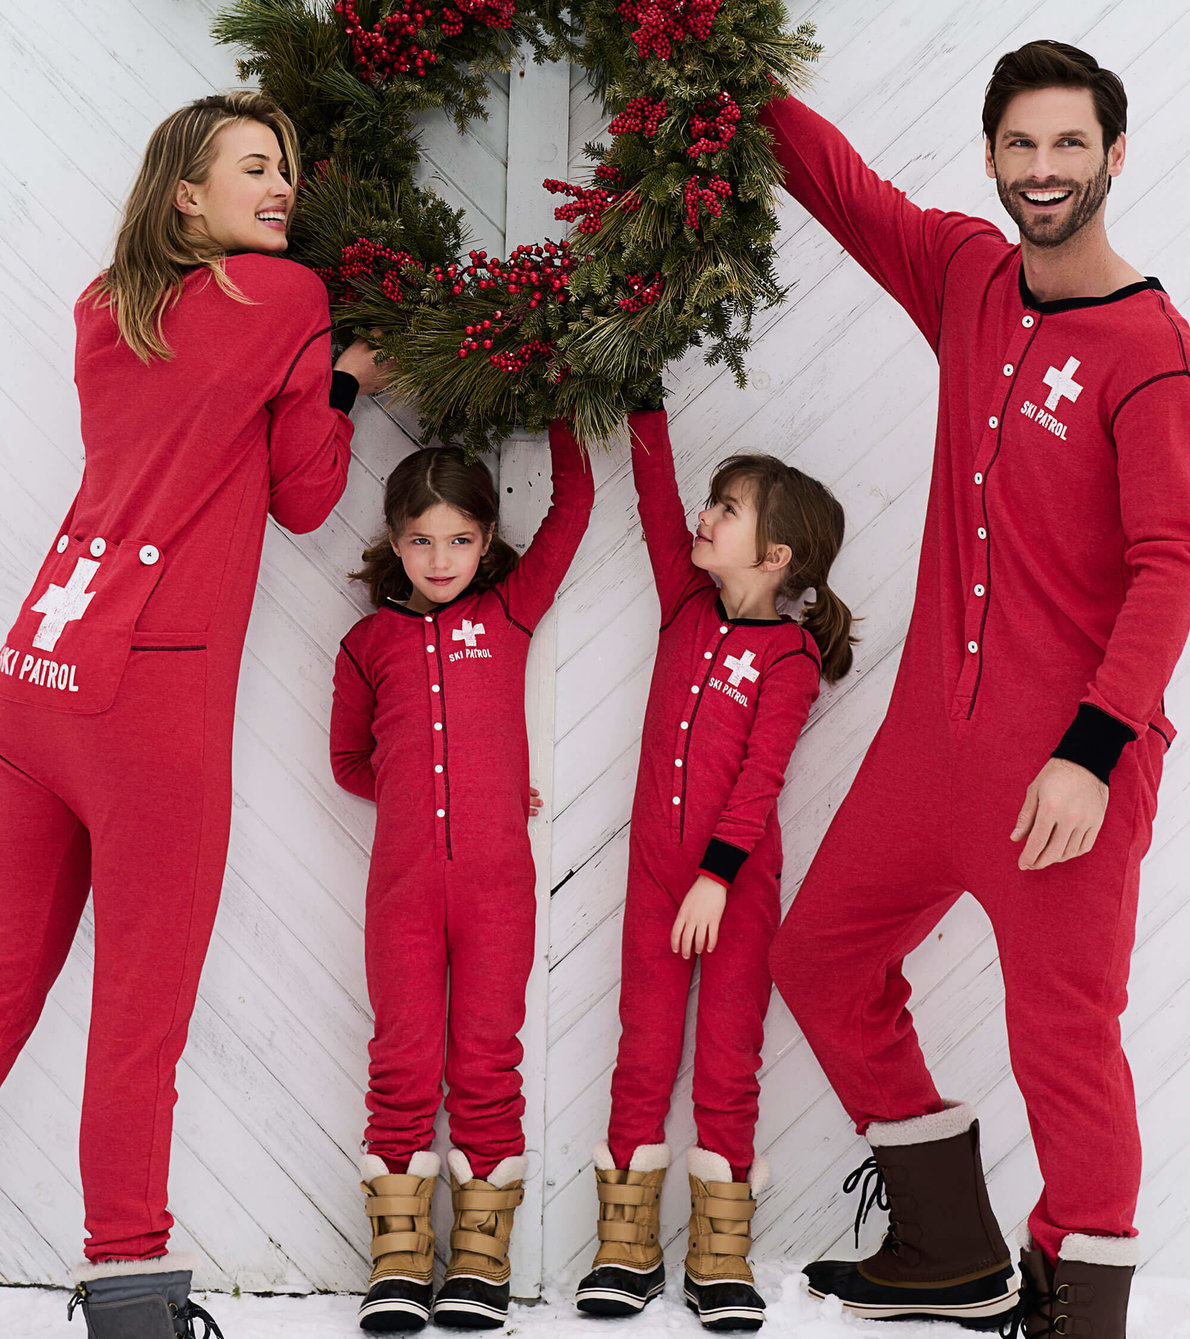 View larger image of Ski Patrol Family Union Suits